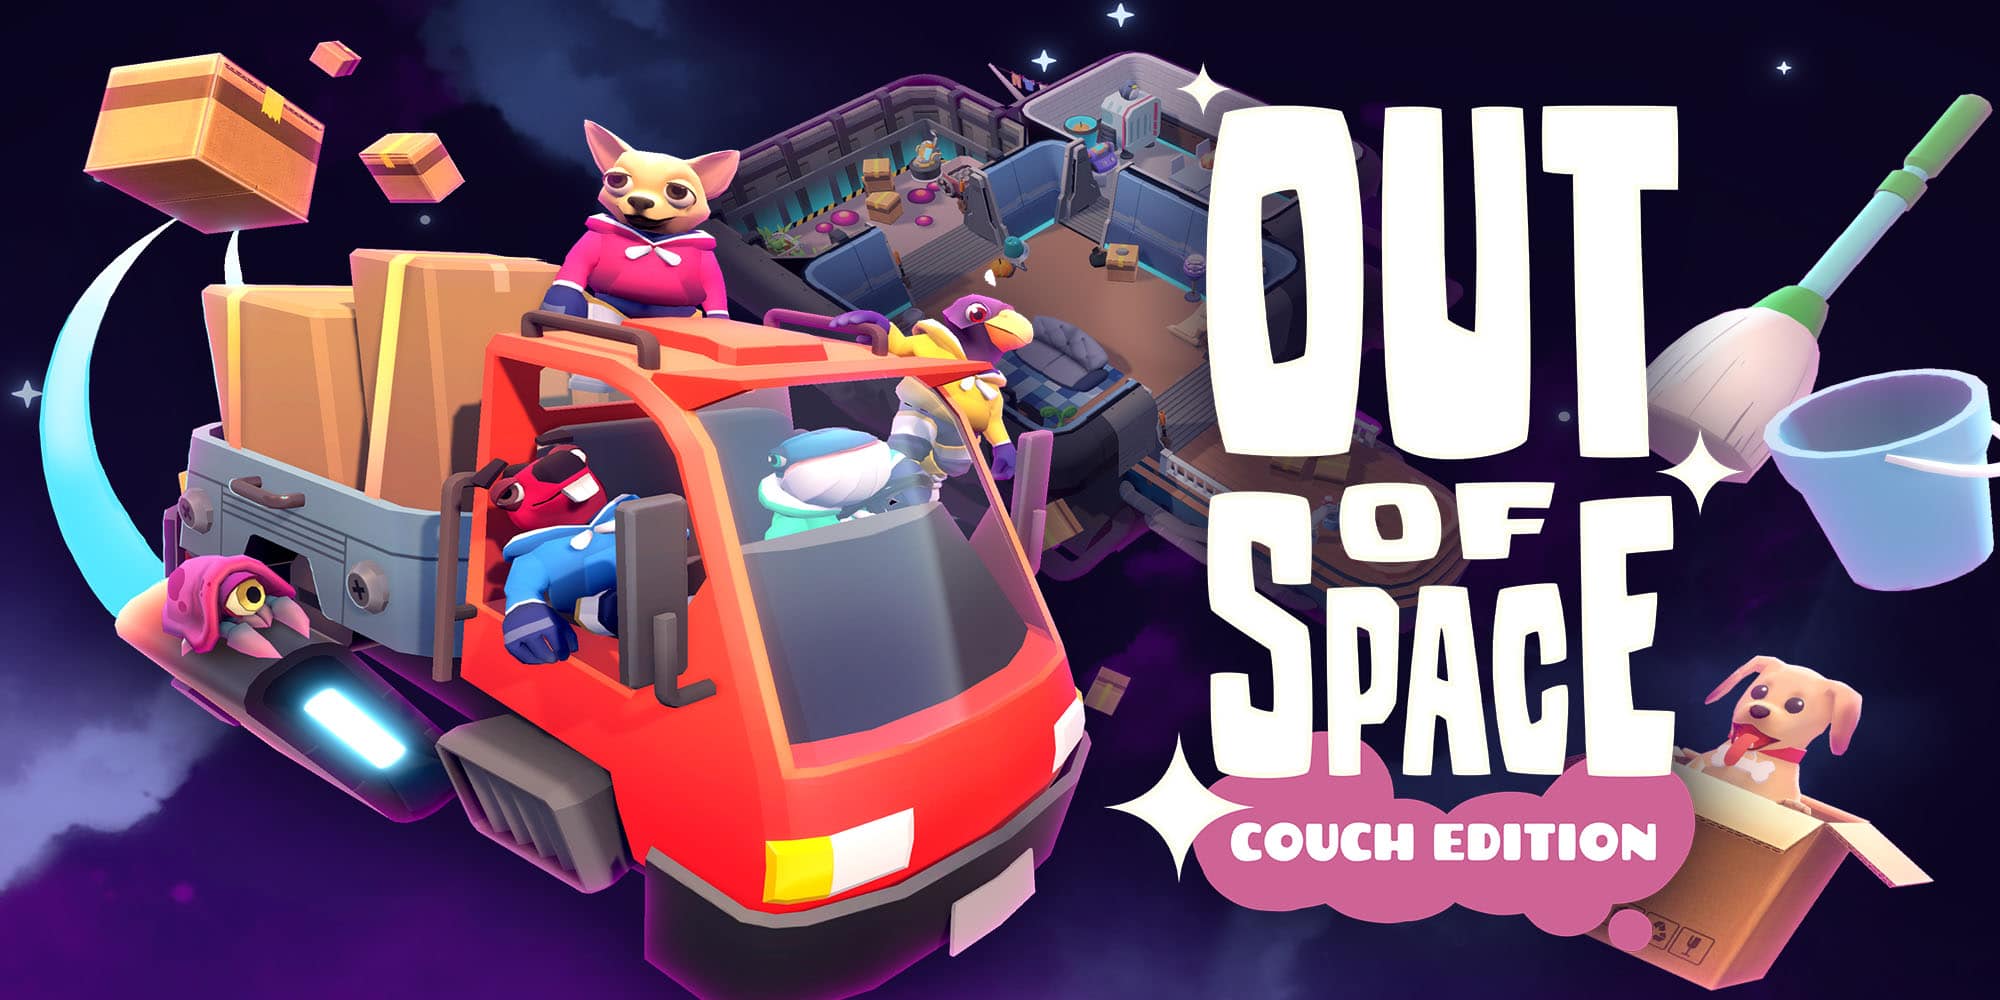 Out of Space: Couch Edition, la recensione per PlayStation 4 4